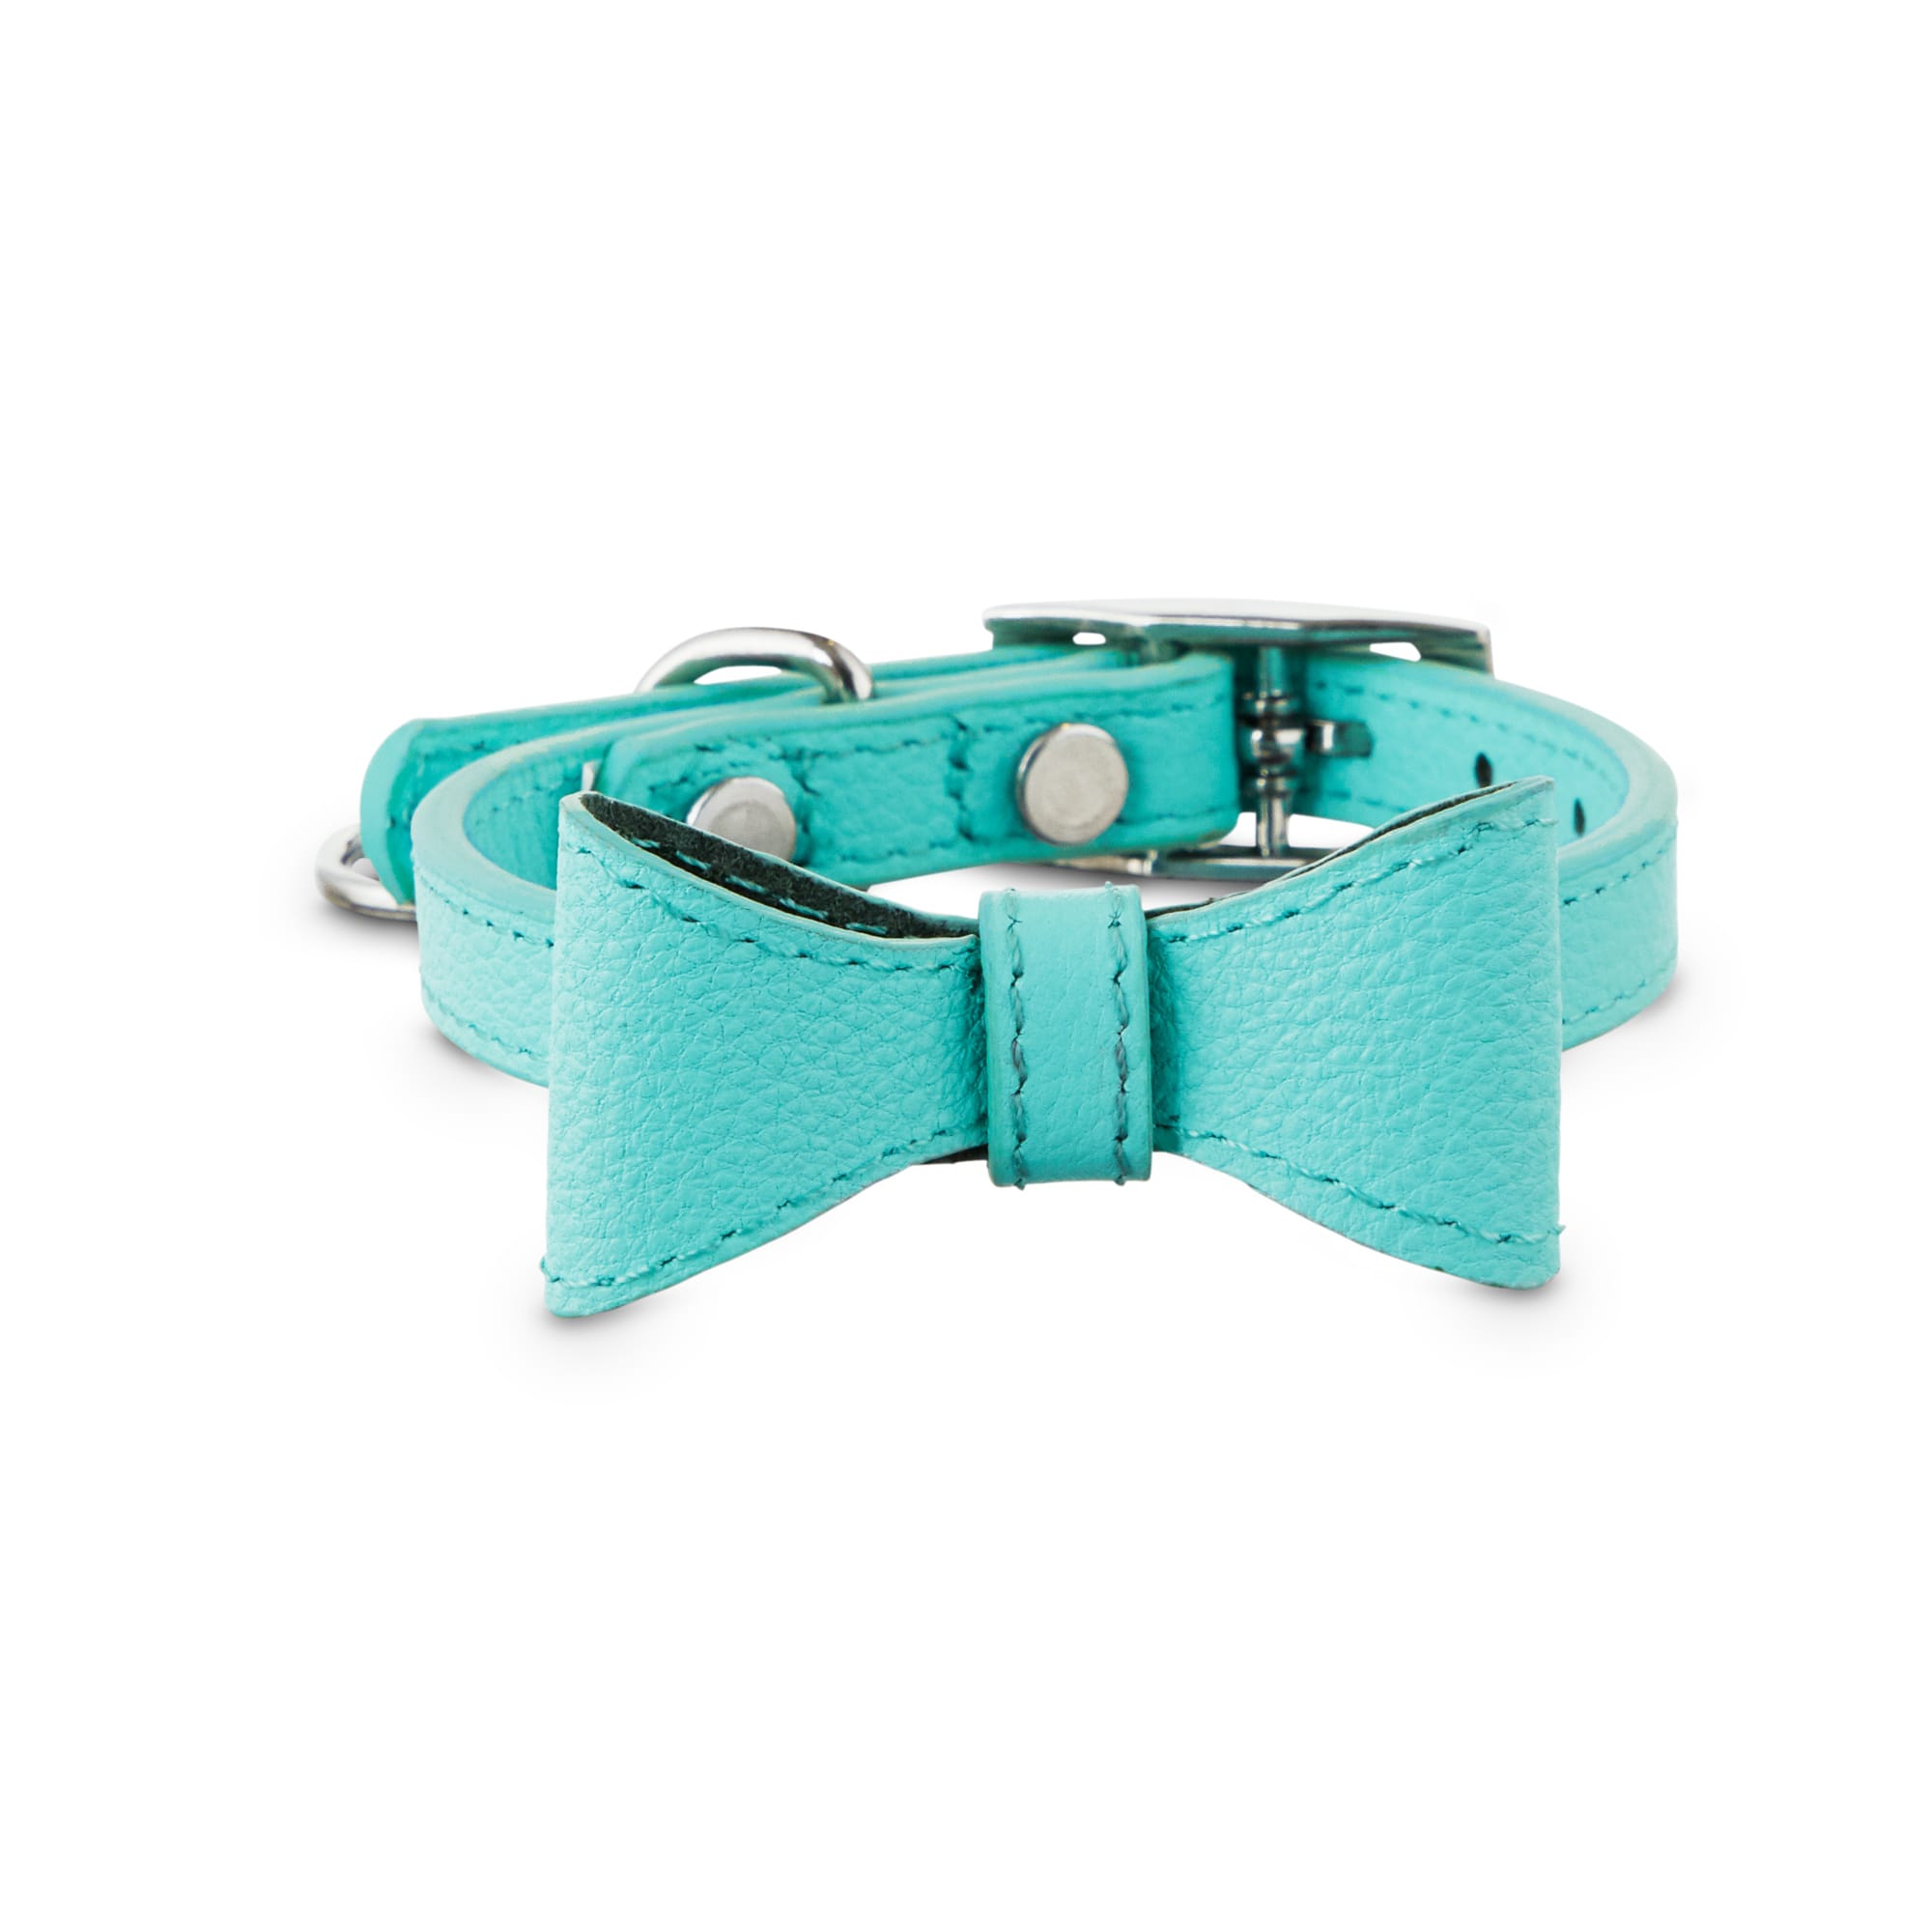 Bond & Co. Teal Leather Bow Tie Dog Collar, X-Small/Small